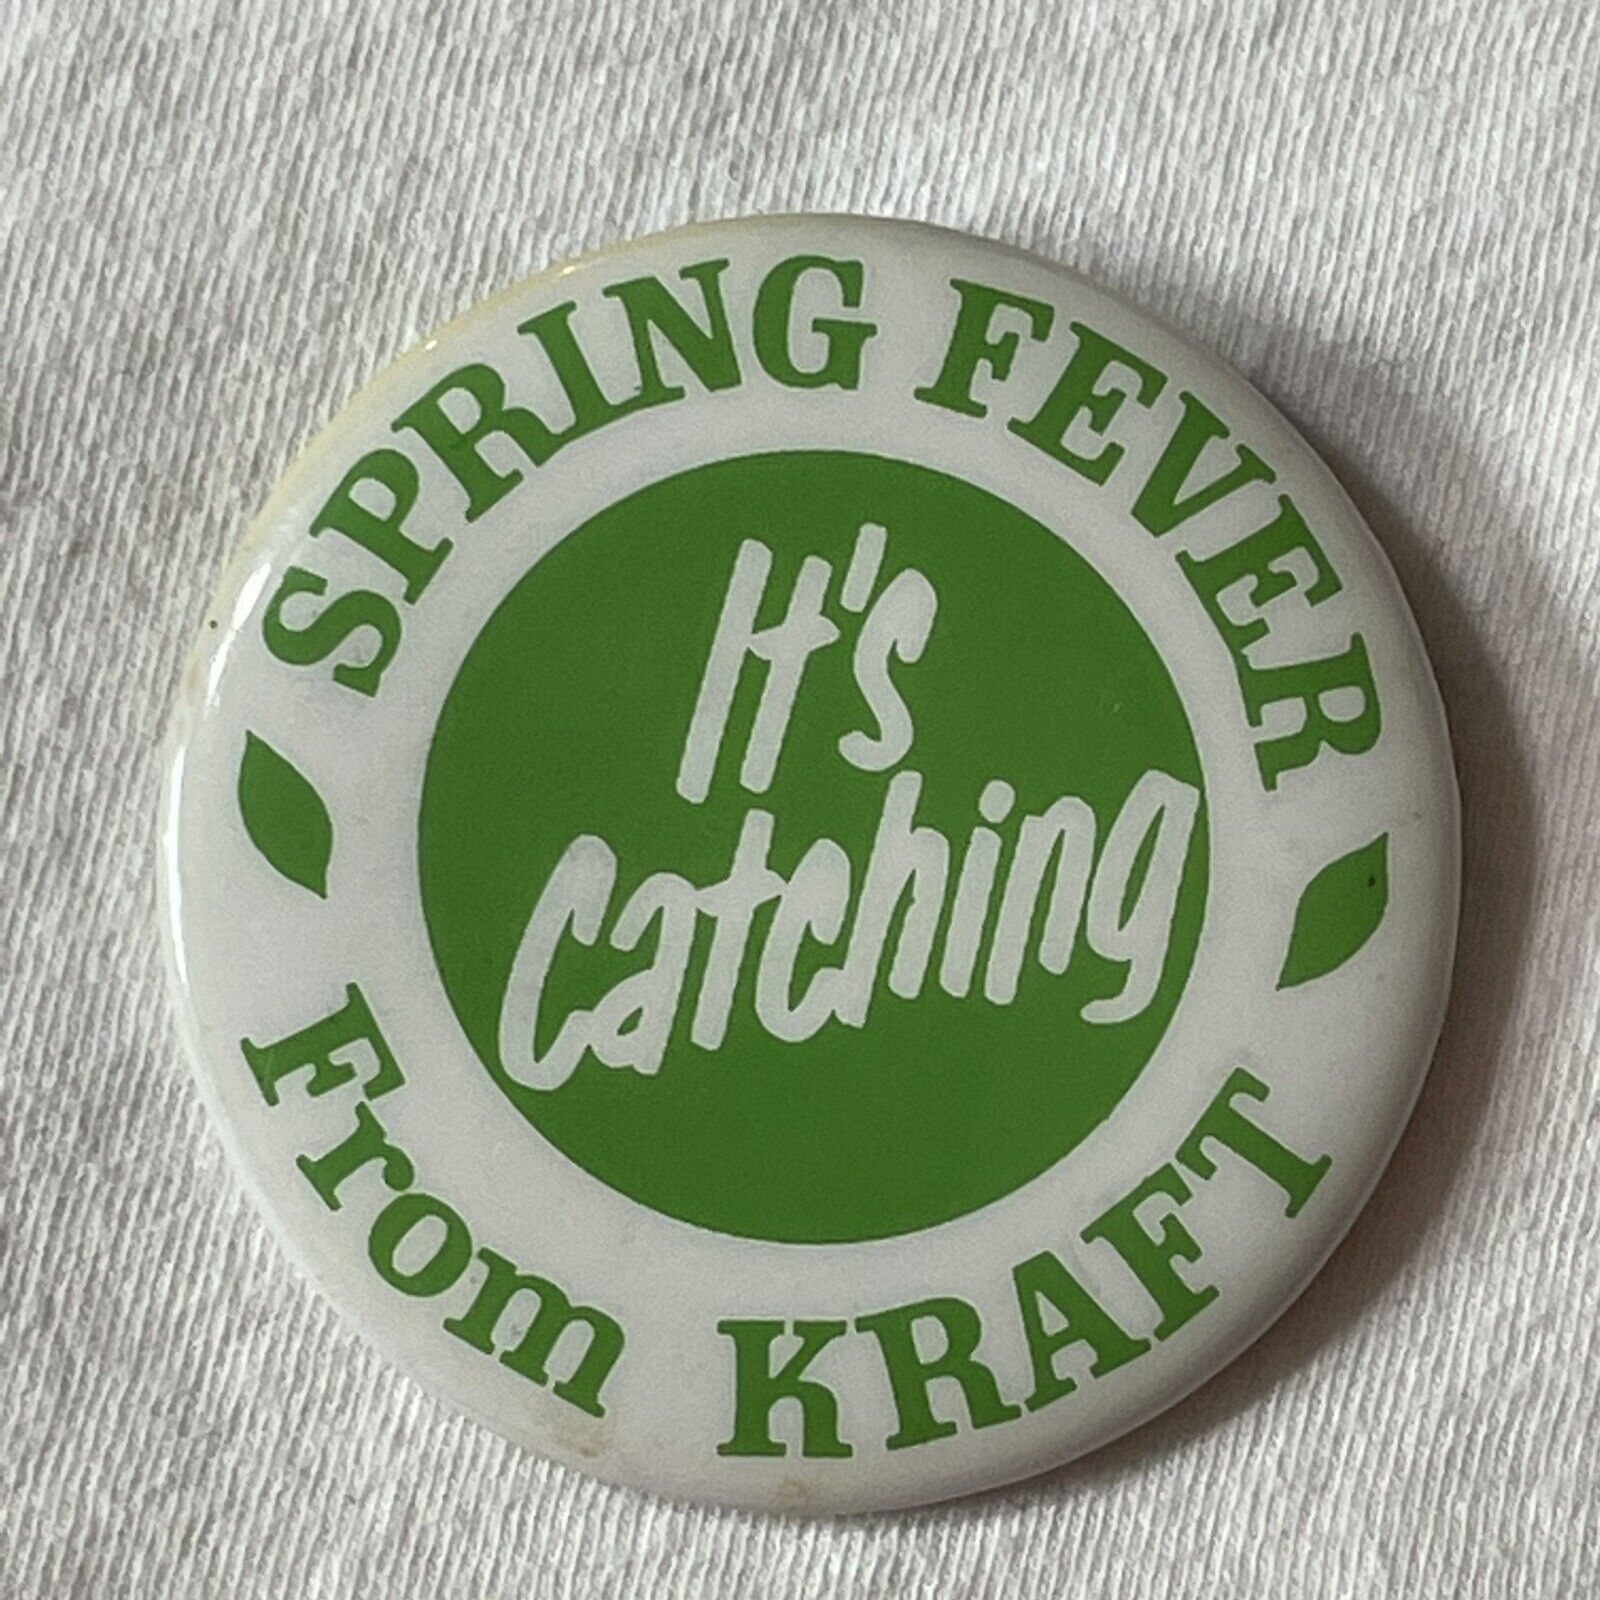 Vtg SPRING FEVER IT’S CATCHING FROM KRAFT Pinback Button (Epidemiology Ha) T017